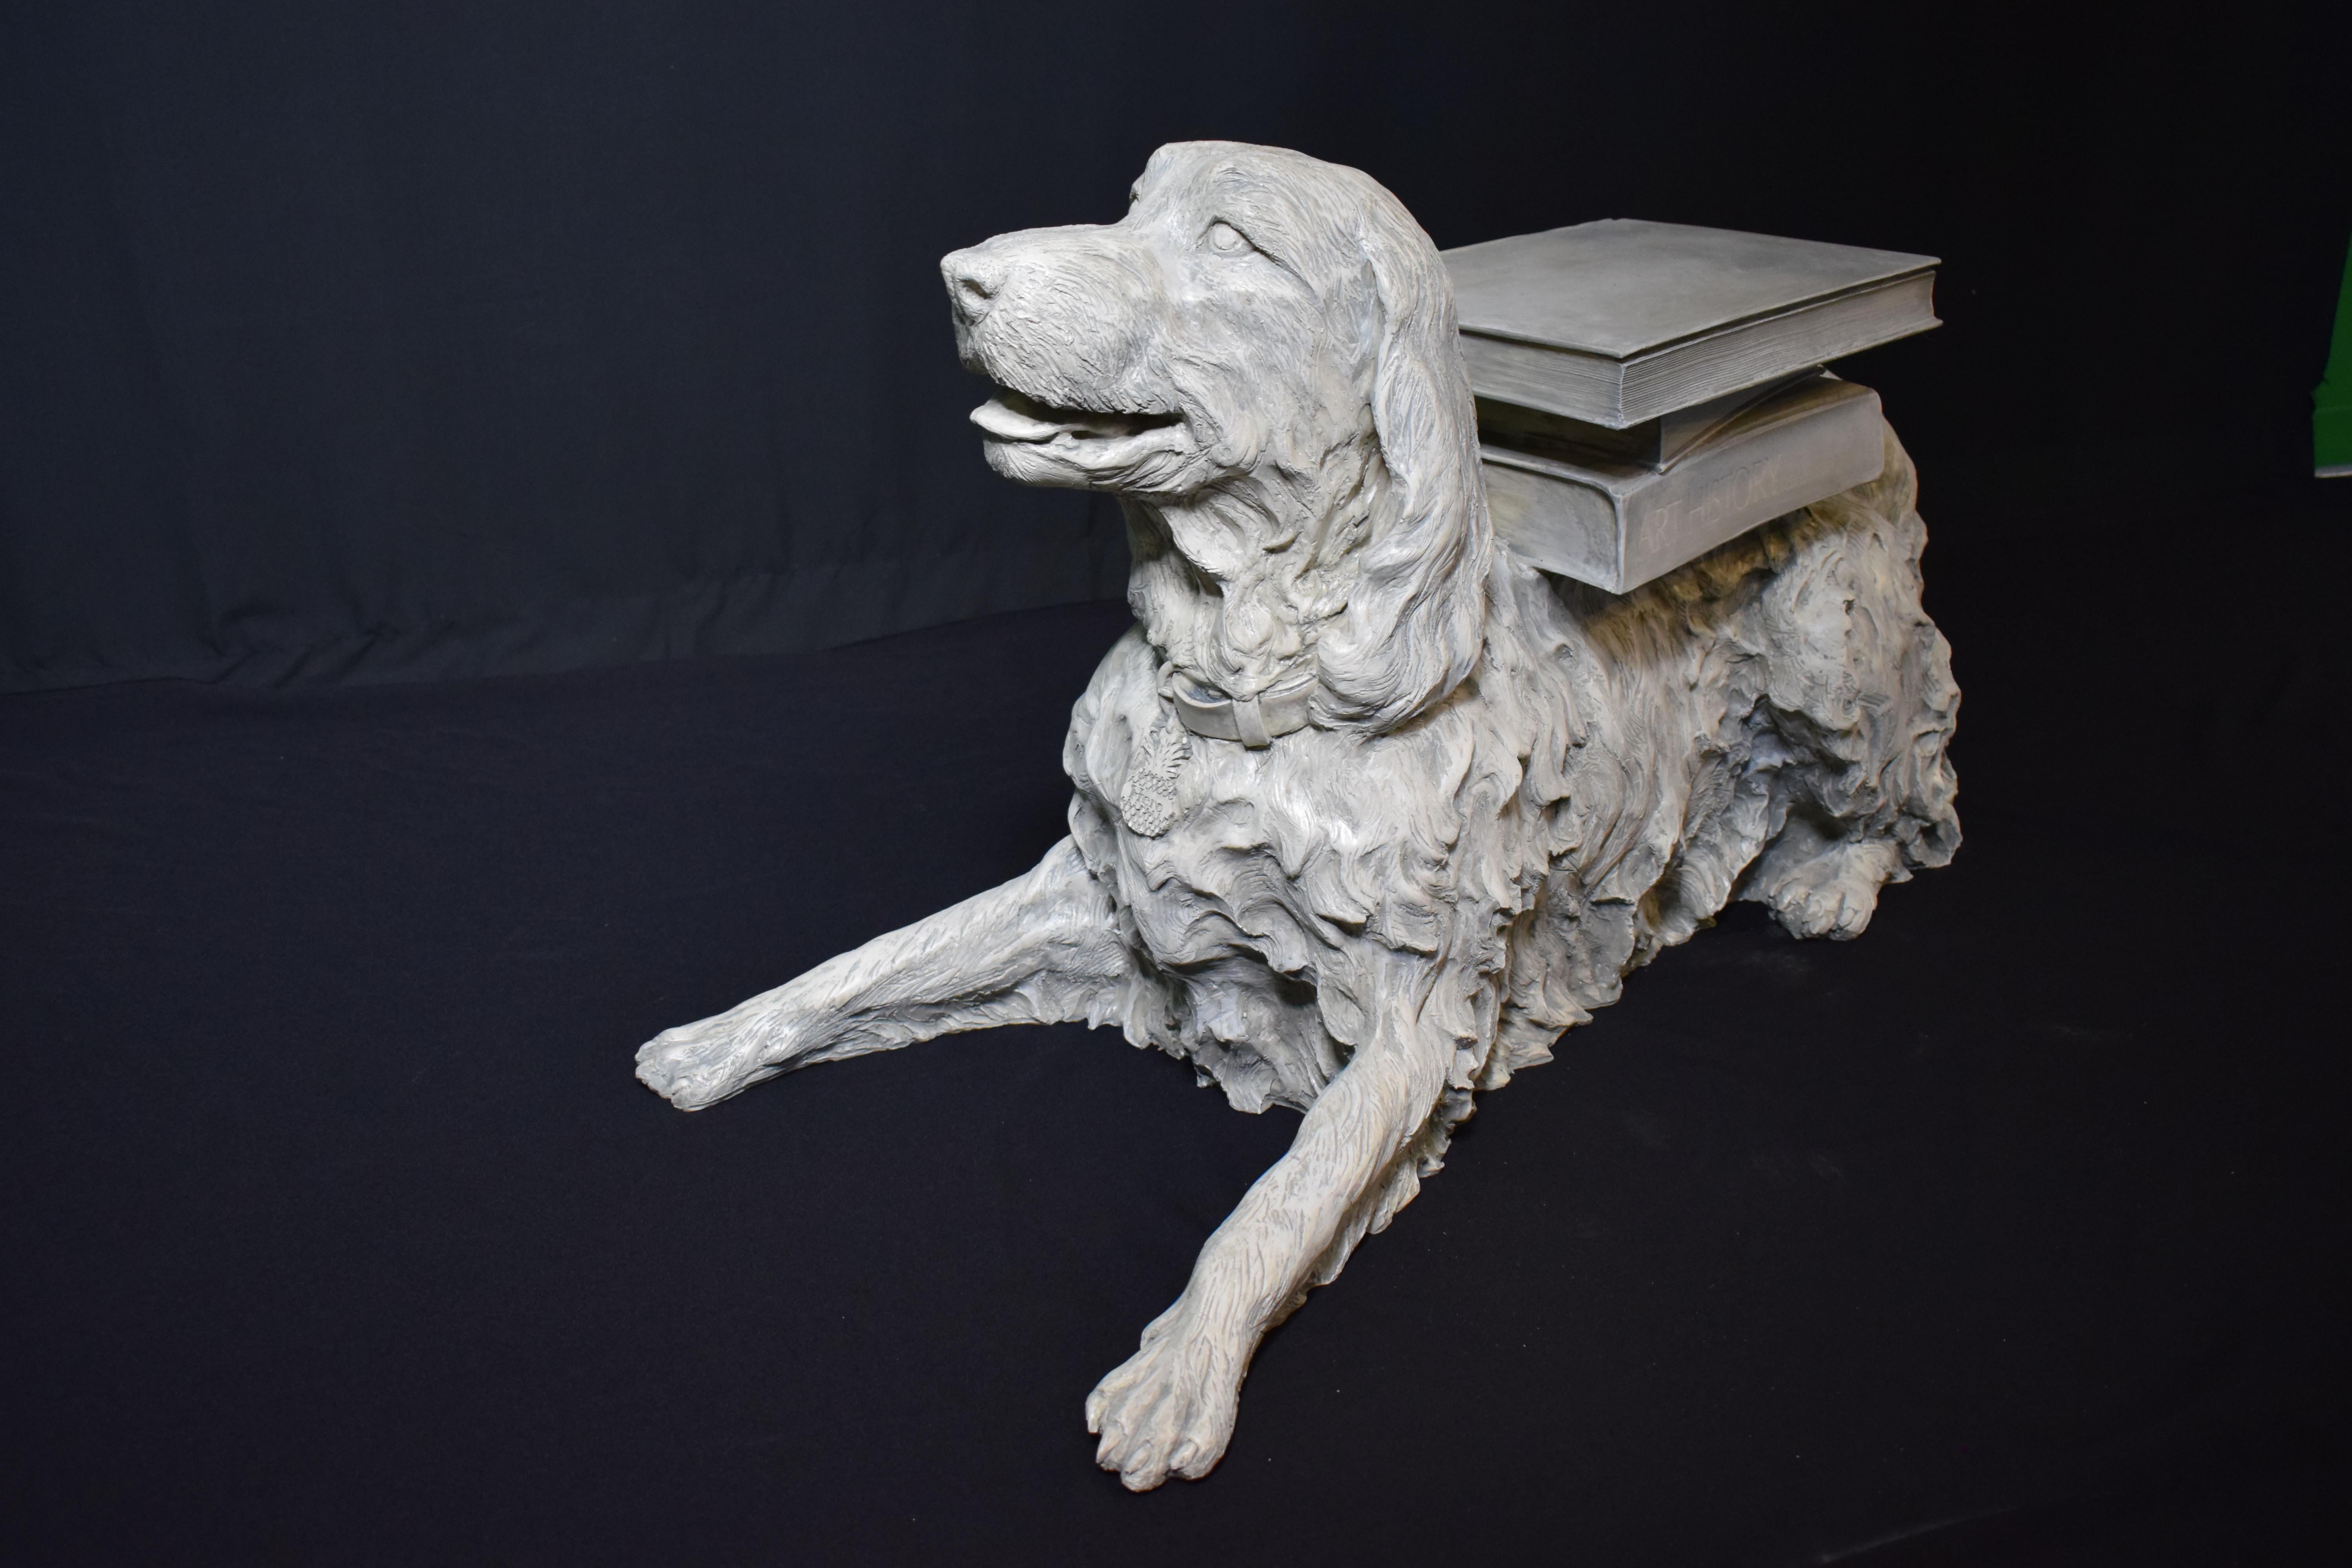 A highly decorative full size sculpture of a dog laying down with some books on his back. Great detail.
Dimensions: Height 22 1/2